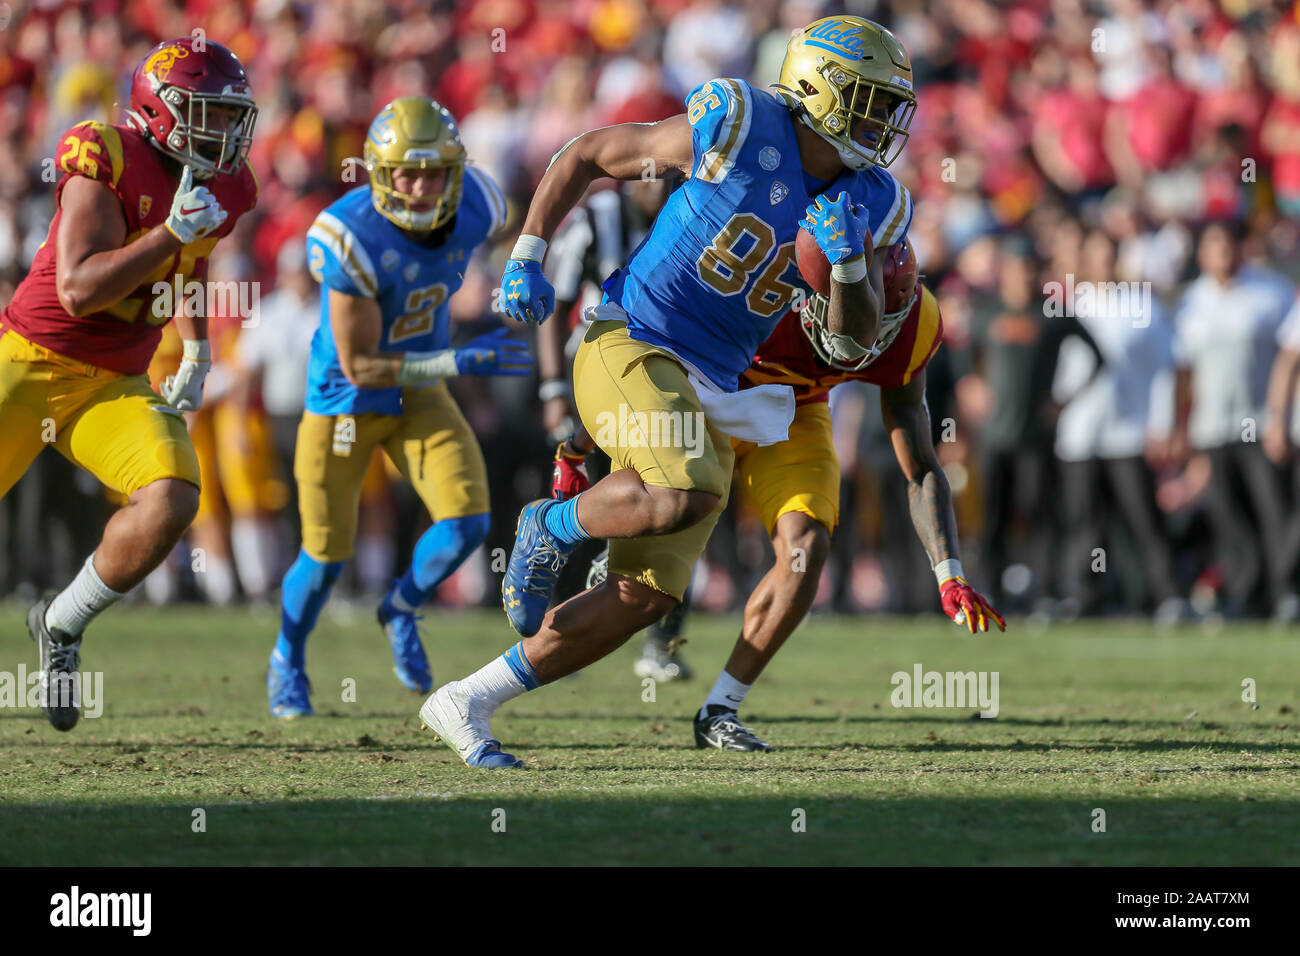 UCLA Bruins tight end Devin Asiasi (86) runs after a catch during the UCLA Bruins vs USC Trojans football game at United Airlines Field at the Los Angeles Memorial Coliseum on Saturday November 23, 2019 (Photo by Jevone Moore) Stock Photo